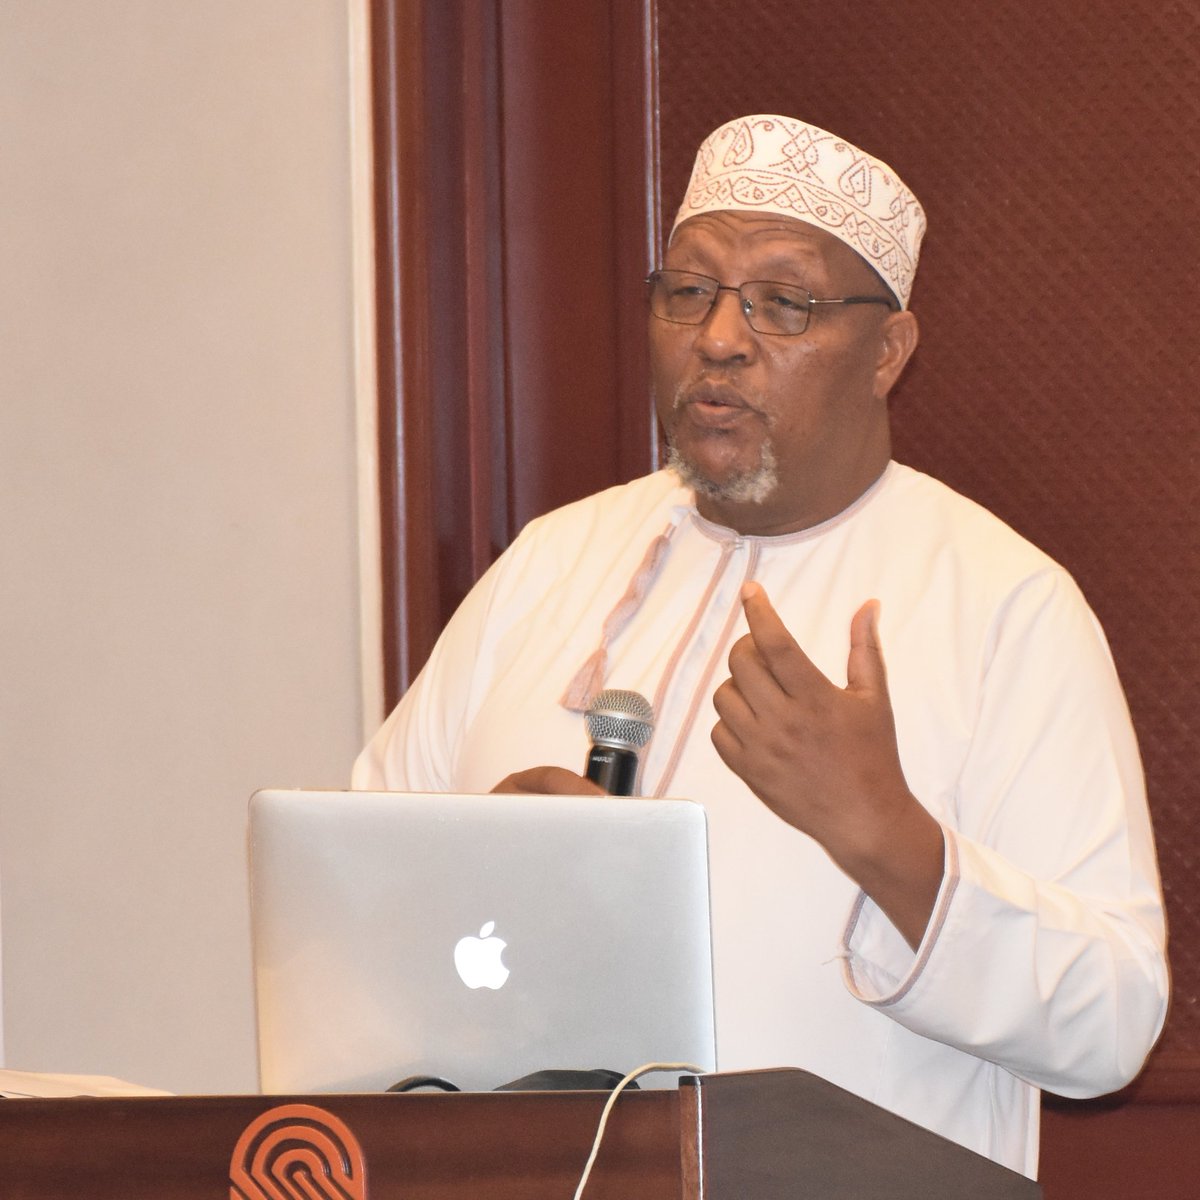 'We can coexist peacefully and respectfully in the same space at the same time regardless of our diversity.' - Sheikh Ibrahim Lethome, Secretary General, @PeaceCenter_ 

@NCTC_Kenya @theGCERF 

#UnityinDiversity
#EndViolentExtremism